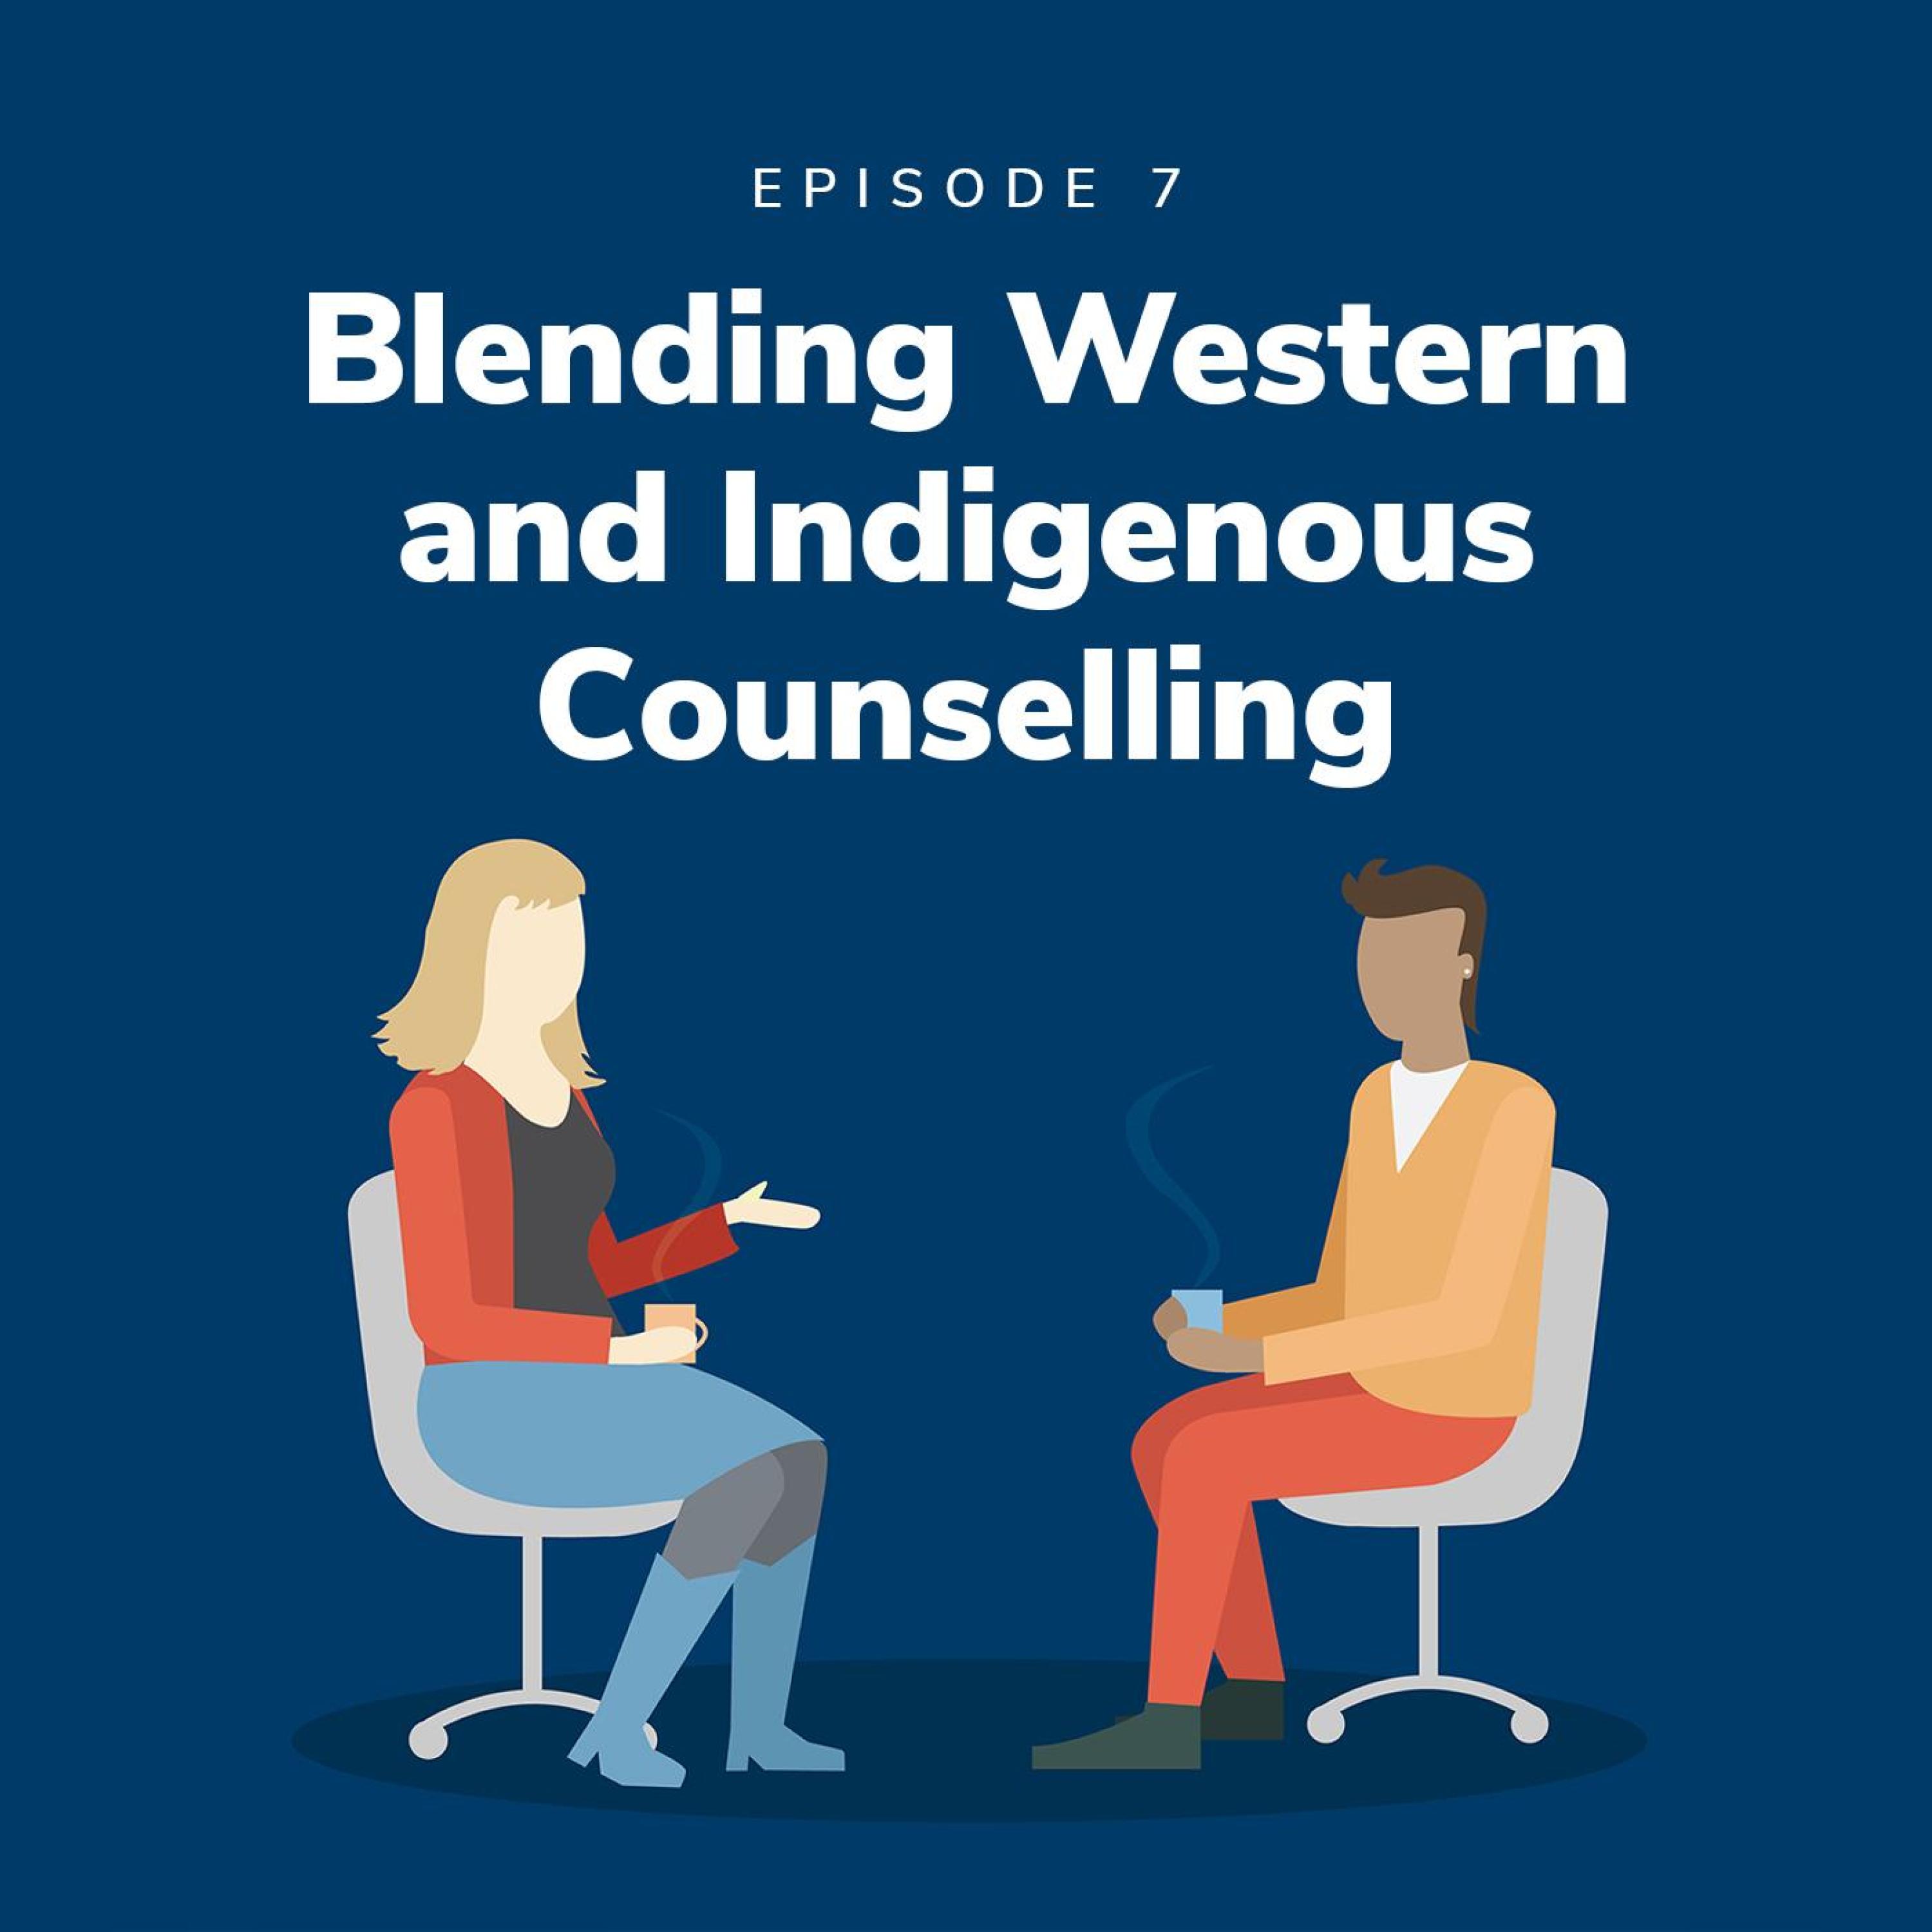 Blending Western and Indigenous Counselling